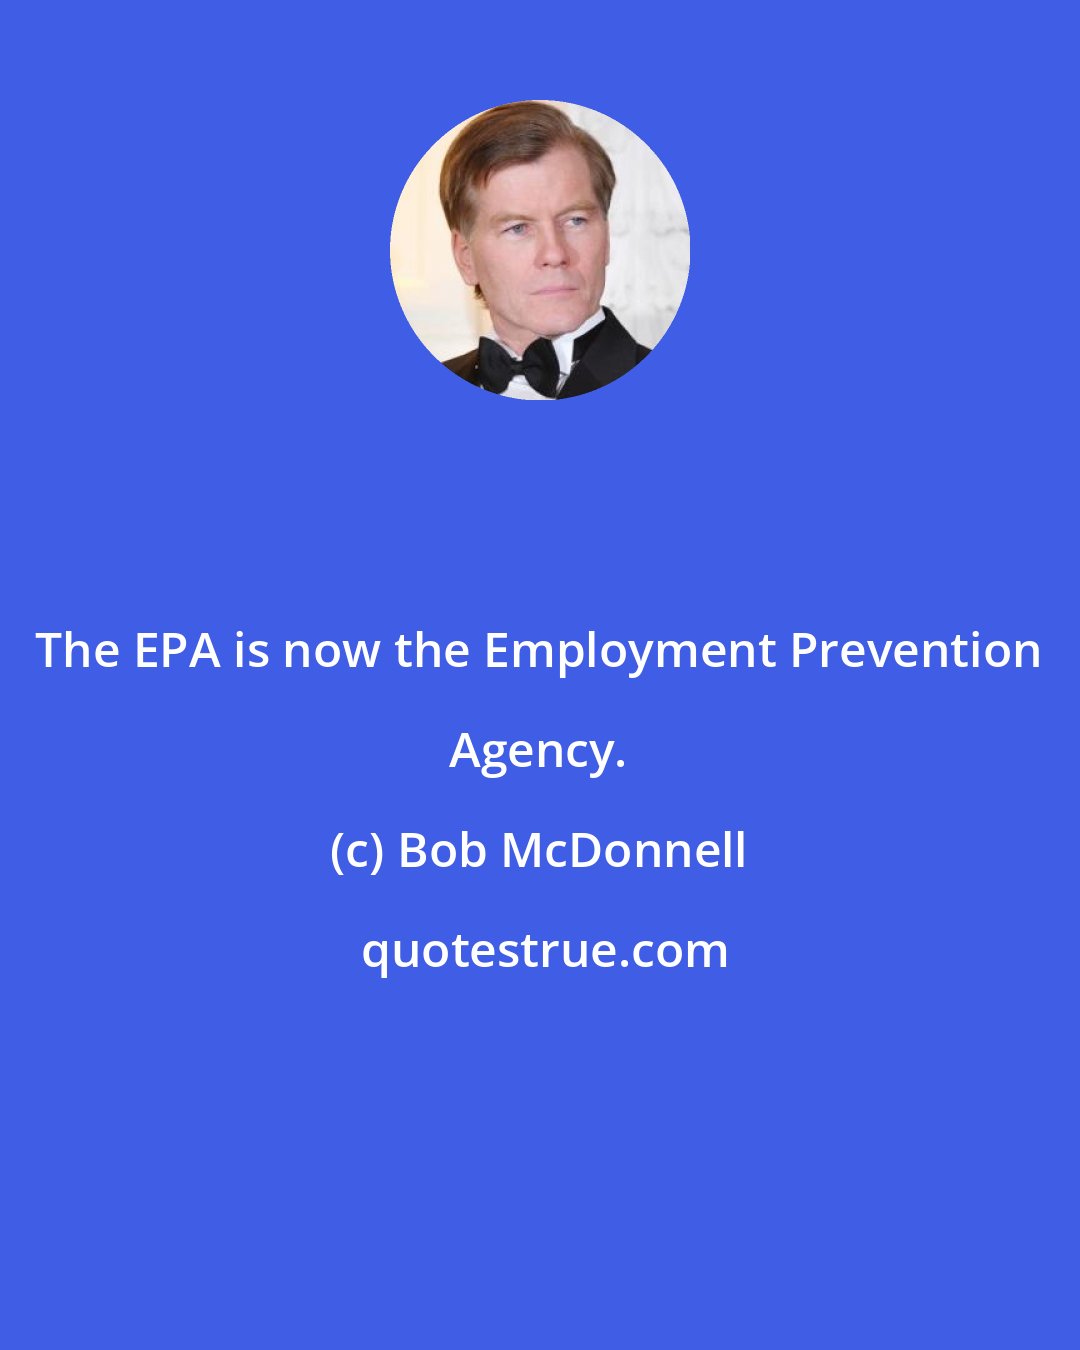 Bob McDonnell: The EPA is now the Employment Prevention Agency.